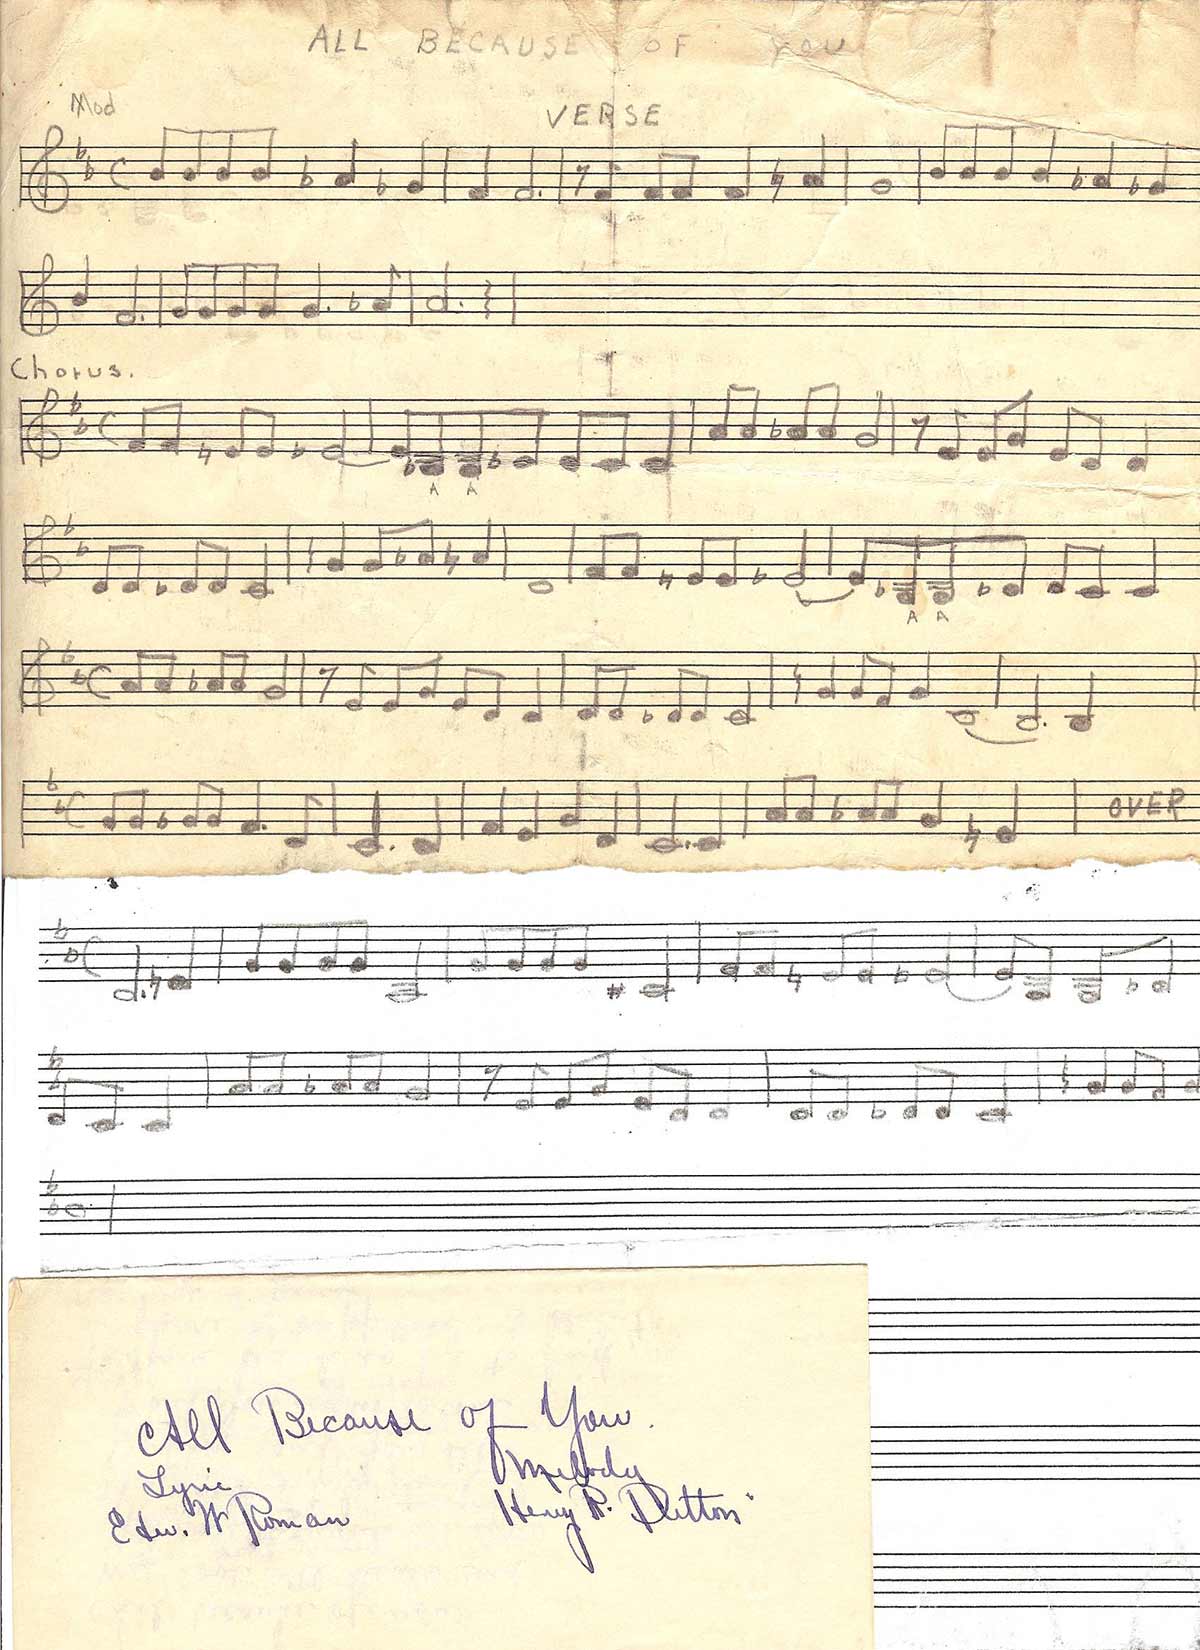 Image of Sheet Music for "All Because of You"